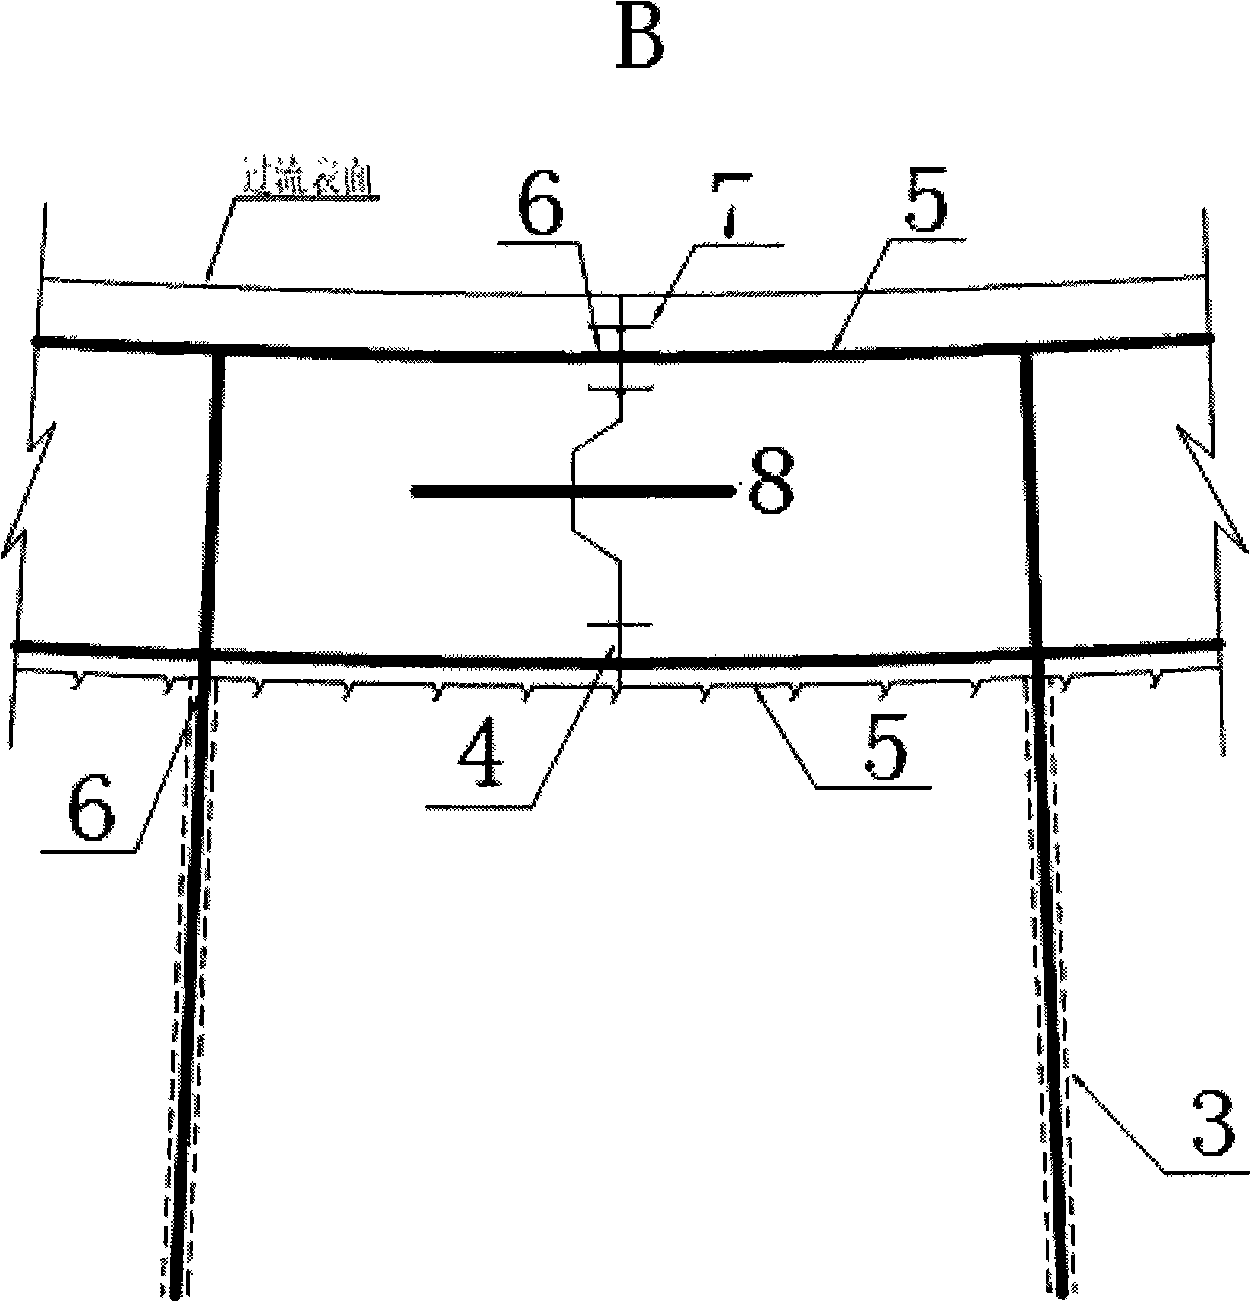 High-geostress narrow-valley inverted arch plunge pool and design method thereof